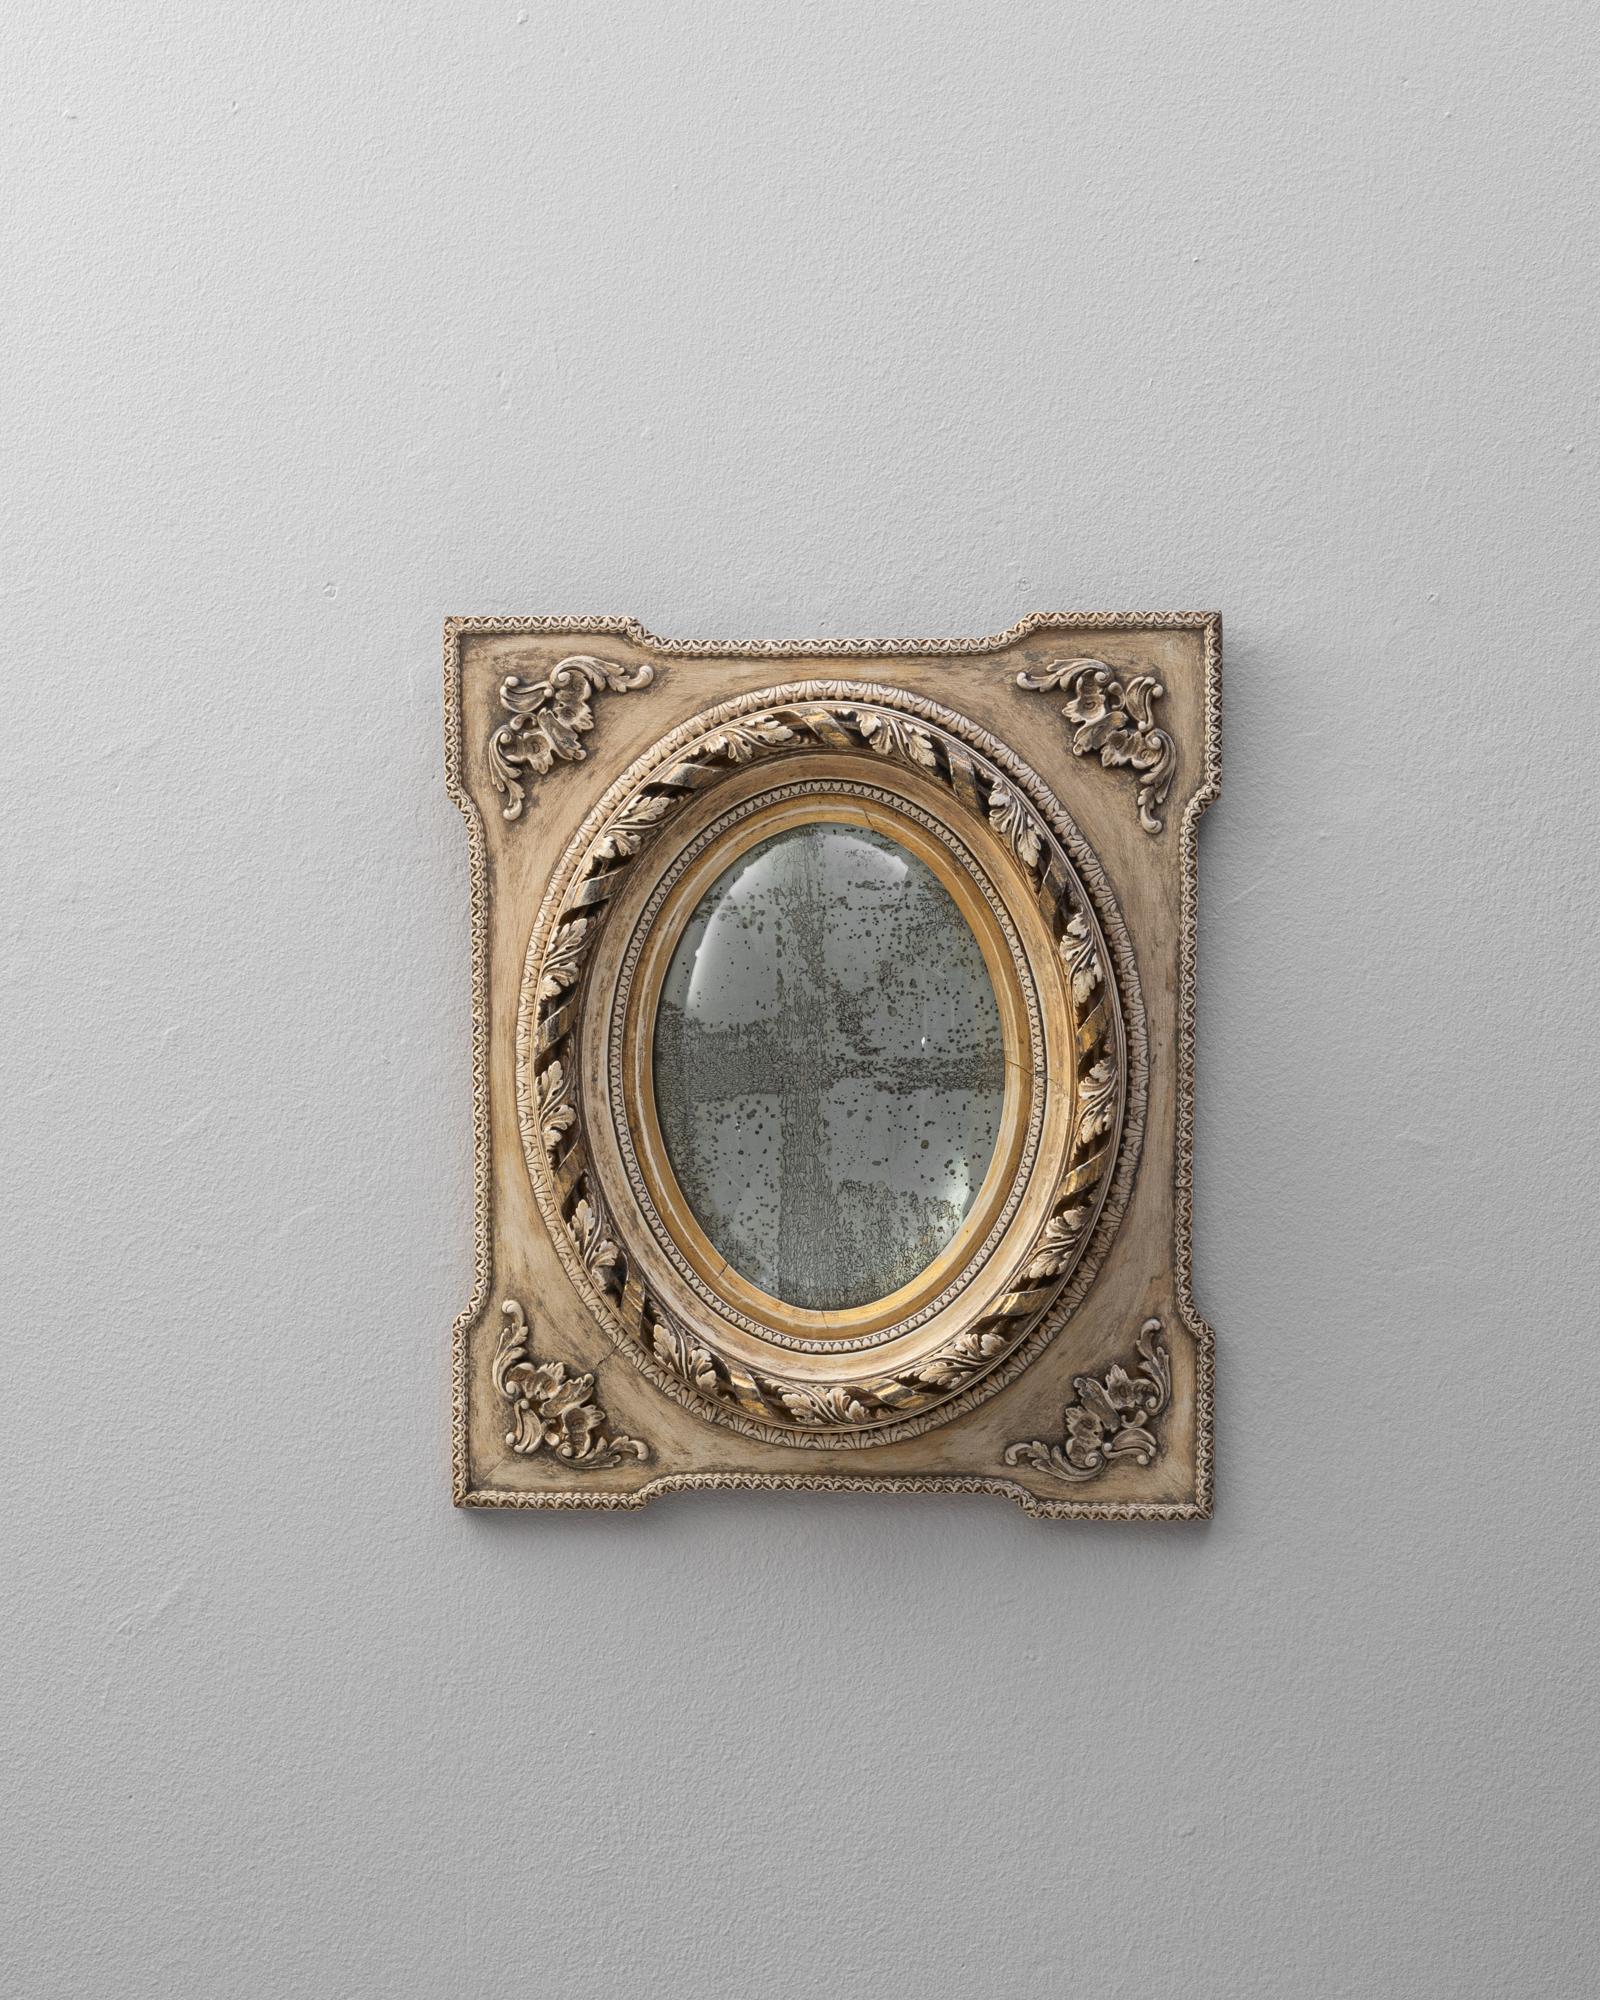 This splendid 19th-century French mirror, framed in bleached oak, is a masterpiece of ornate design and timeless elegance. The intricately carved foliage and acanthus leaves that adorn its frame exude a Baroque influence, each detail whispering of a